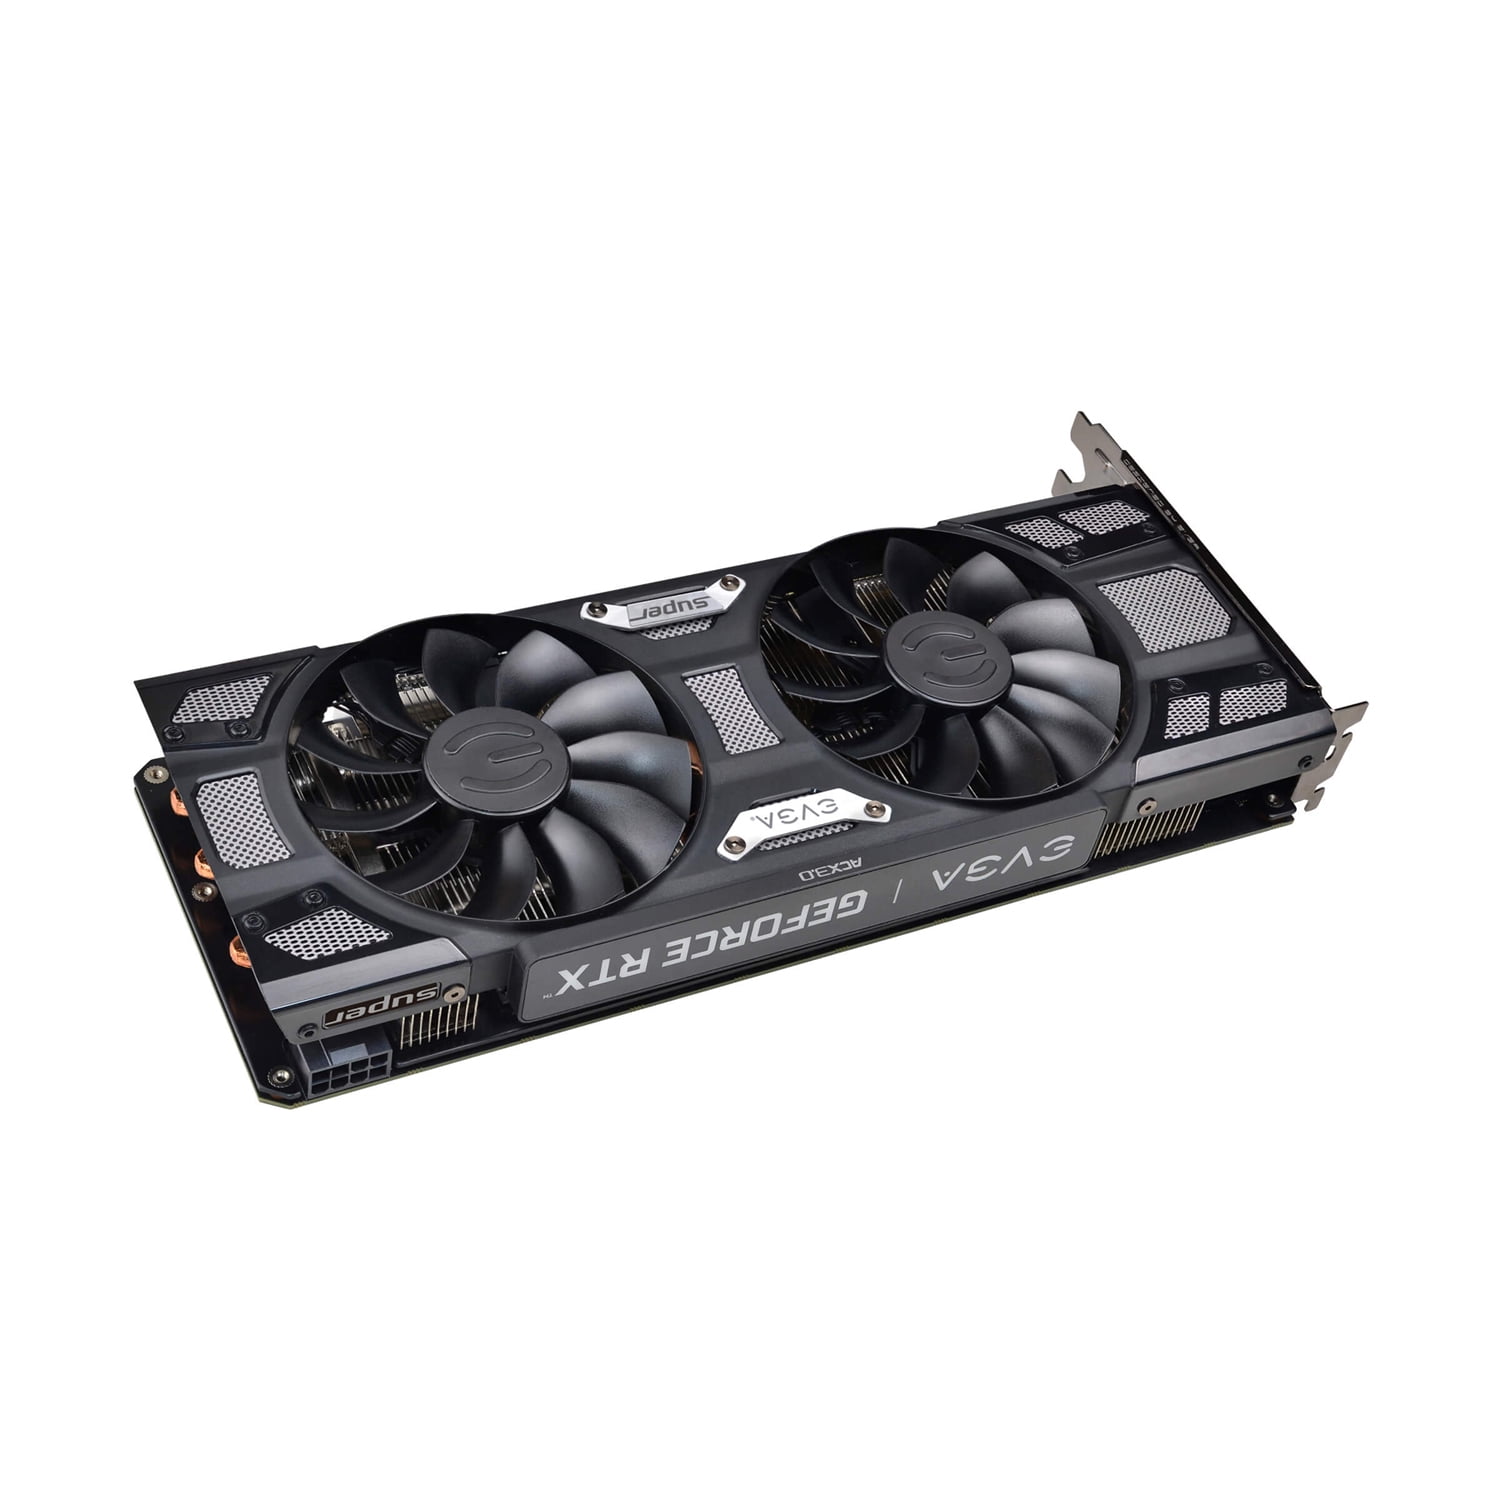 EVGA RTX 2060 Super SC Dual Fans Gaming Graphic Cards, Black -